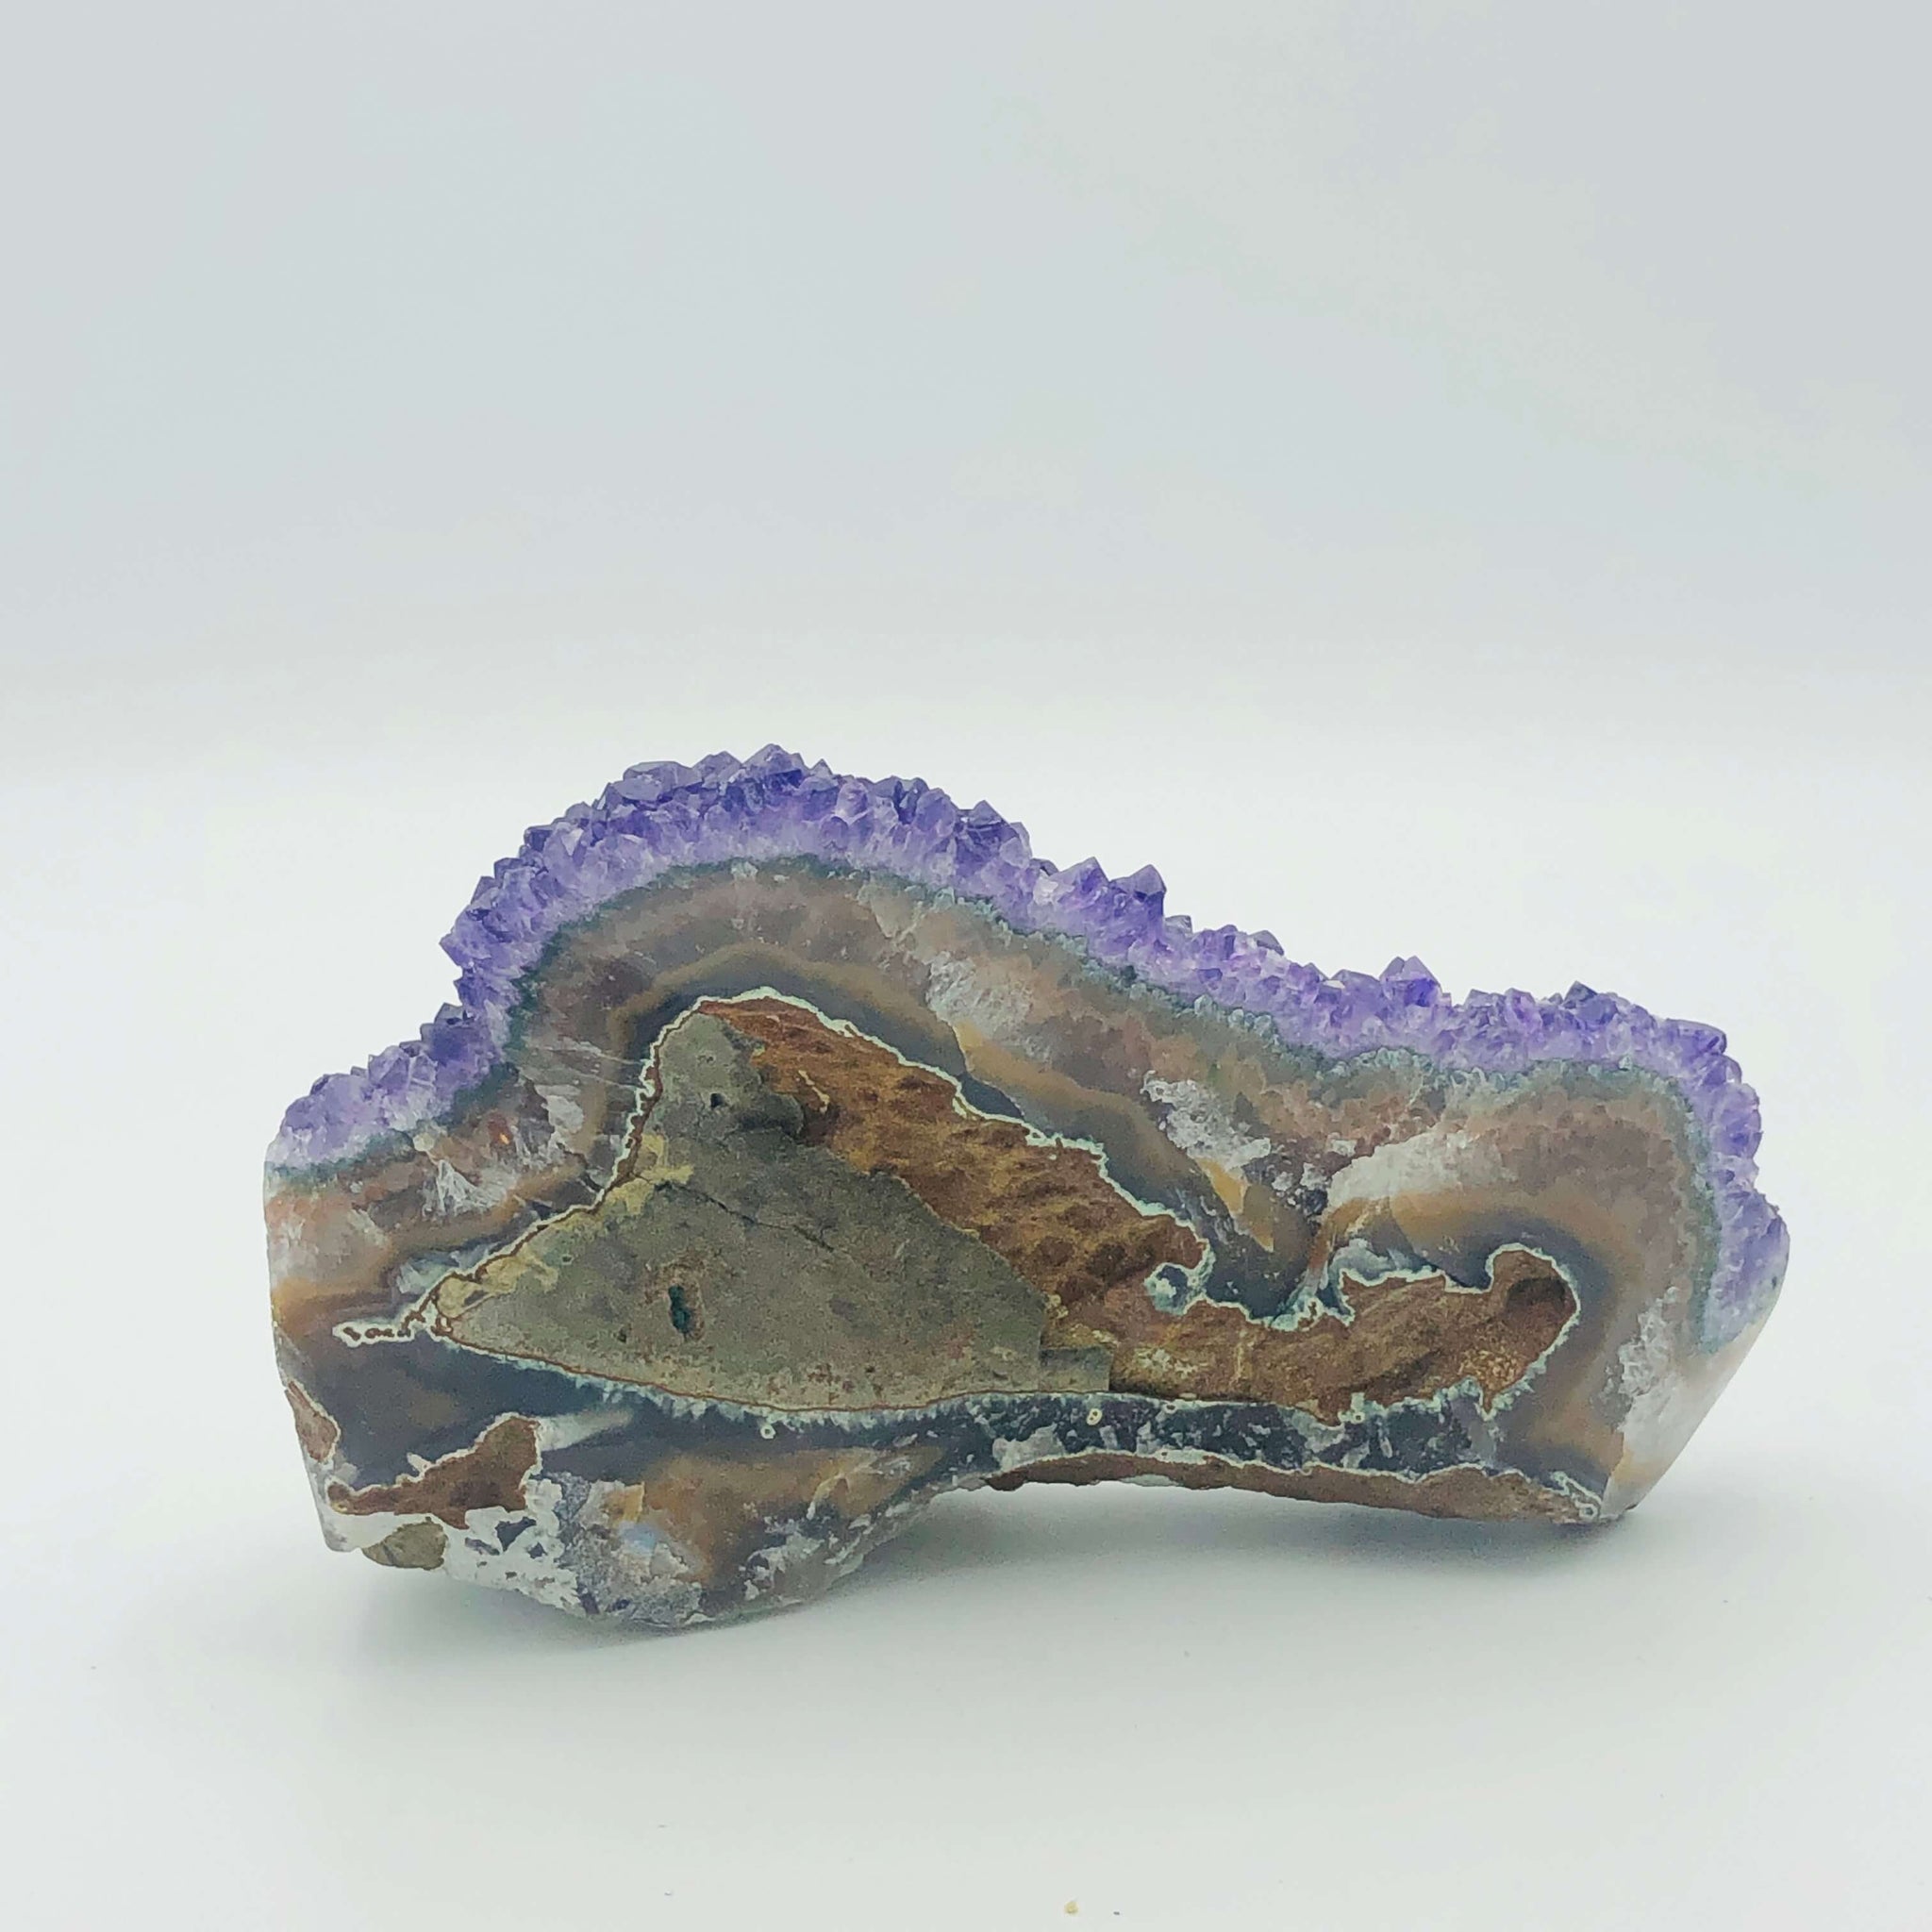 Amethyst and calcite with polished agate edge